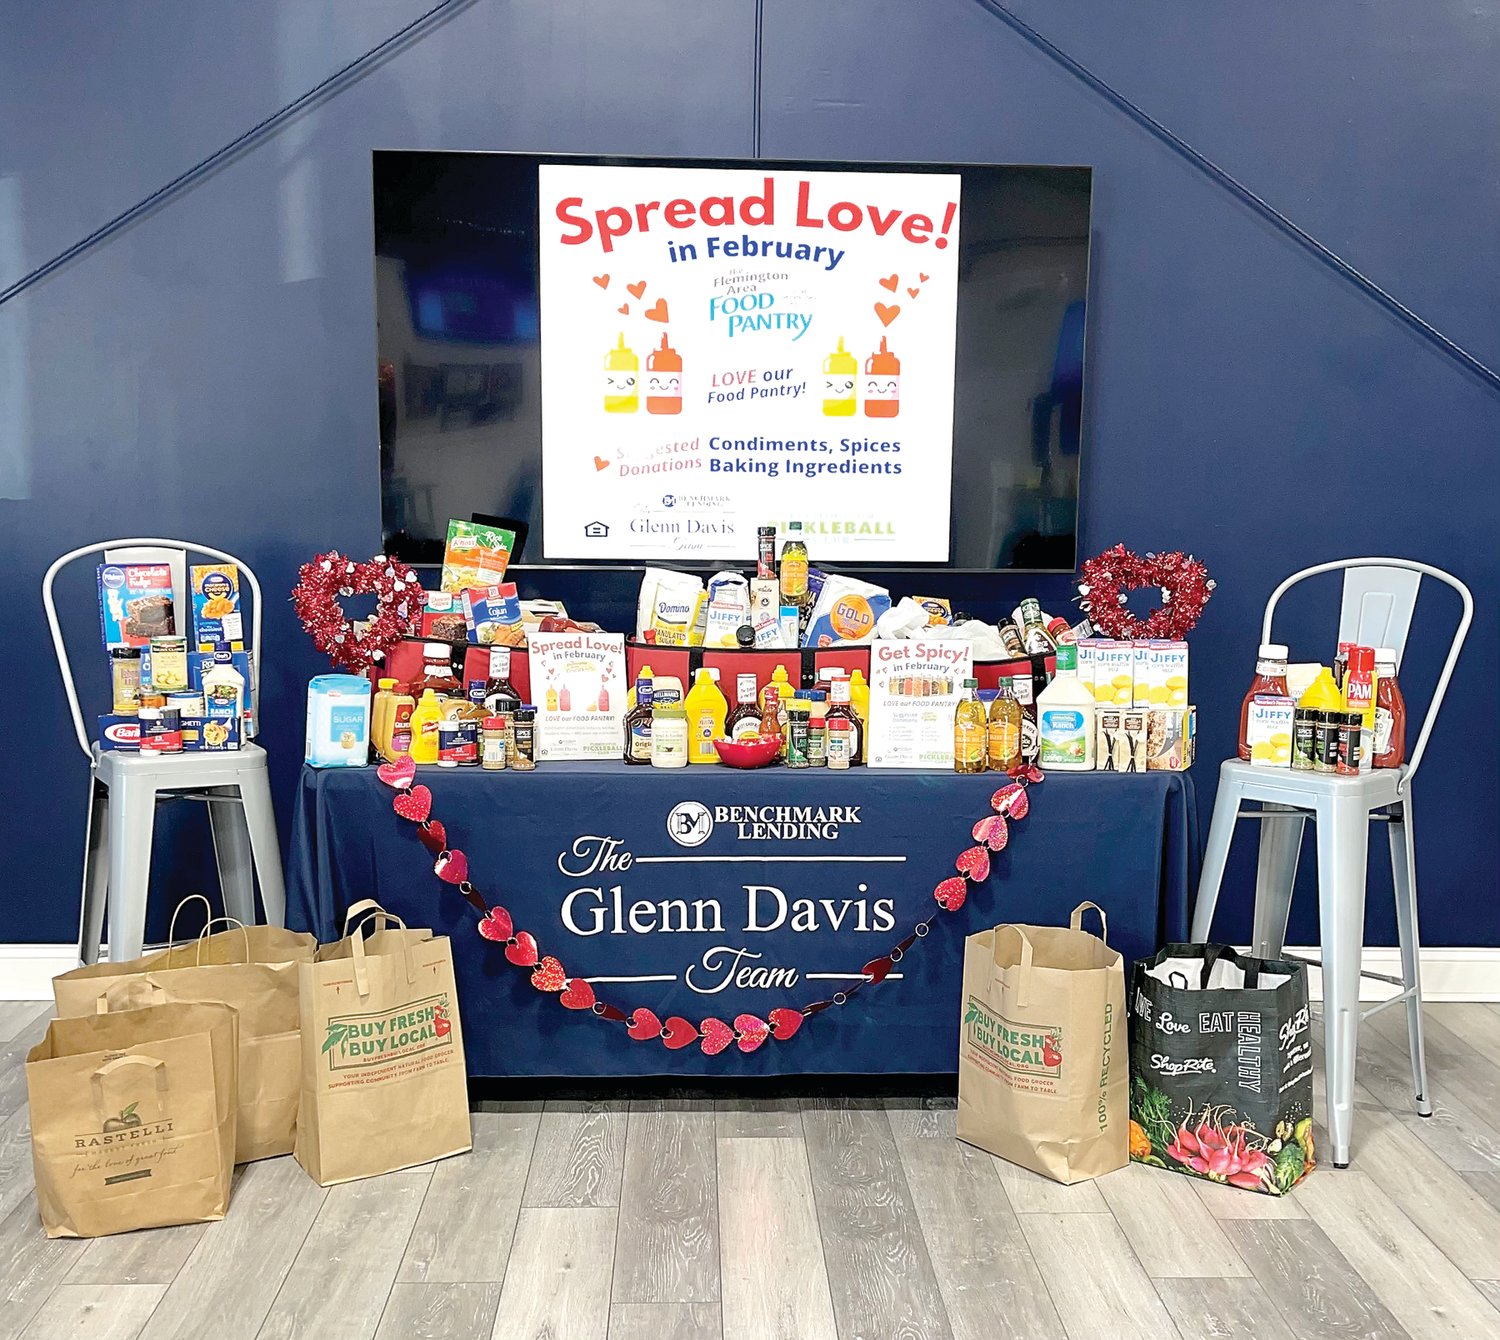 Benchmark Lending and Flemington Pickleball Club are collecting donations for the “Love our Food Pantry” food drive this February to benefit the Flemington Area Food Pantry. Pictured are donations from the inaugural Love our Food Pantry event in 2021.